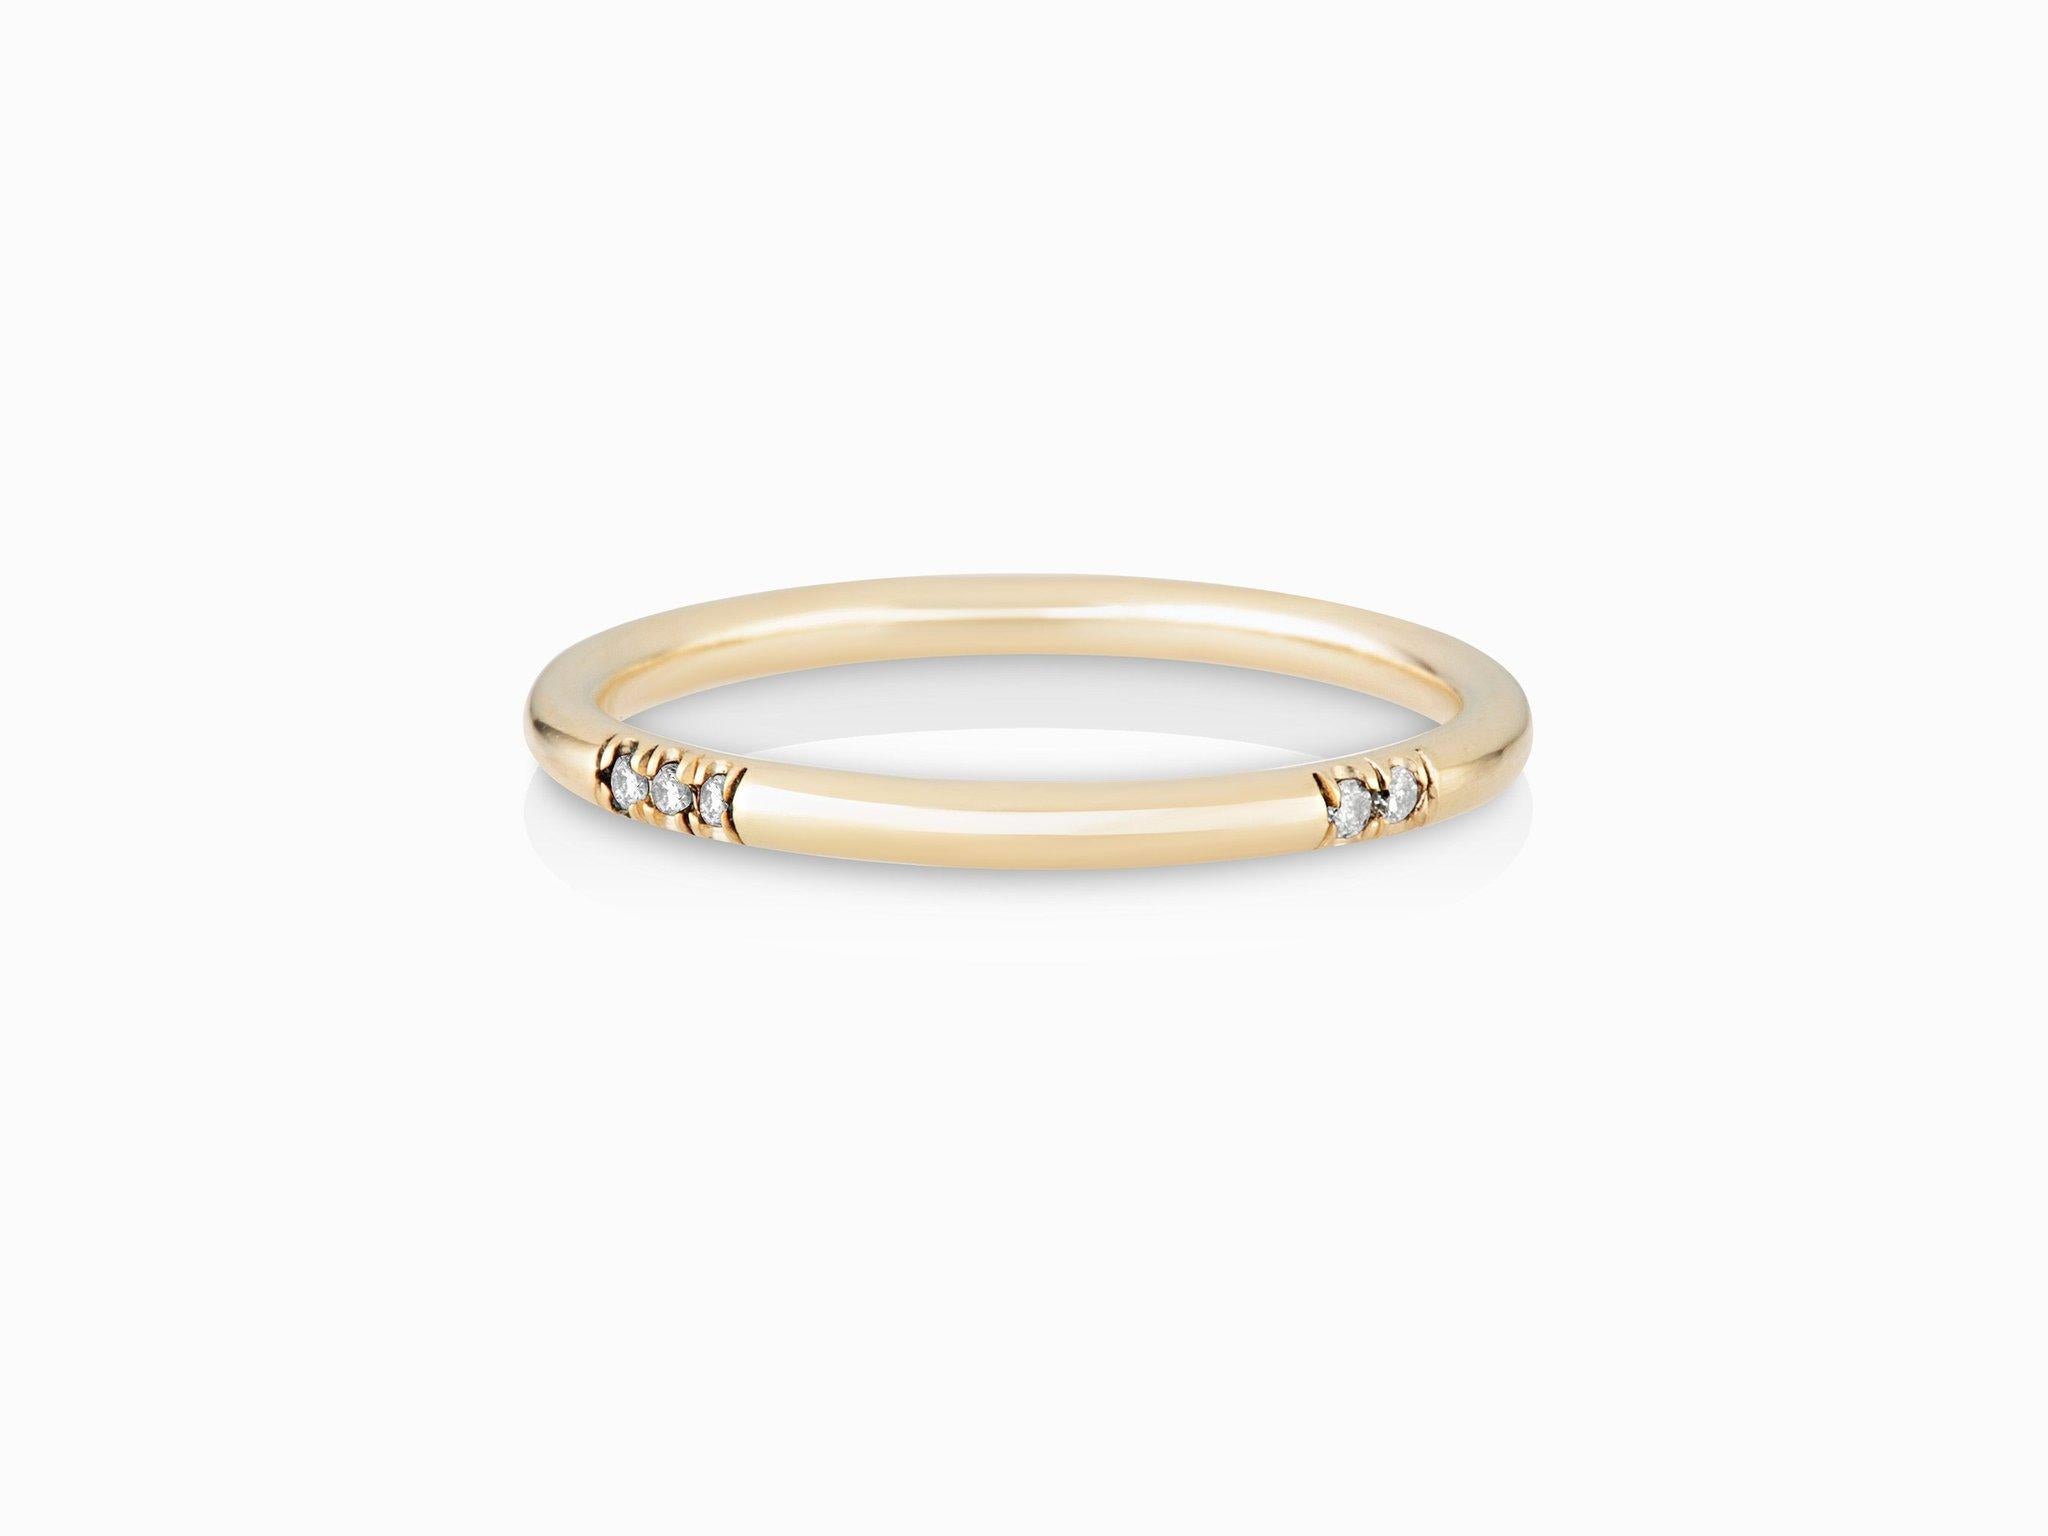 MANIAMANIA Immersion Wedding ring or Stackable band in 14k Yellow Gold, featuring one 3x1mm baguette white diamond (0.03 ct) and pavé accents of white diamonds (0.08tcw).
Size 6
*Other sizes can be made to order on request, with 5-6 week lead